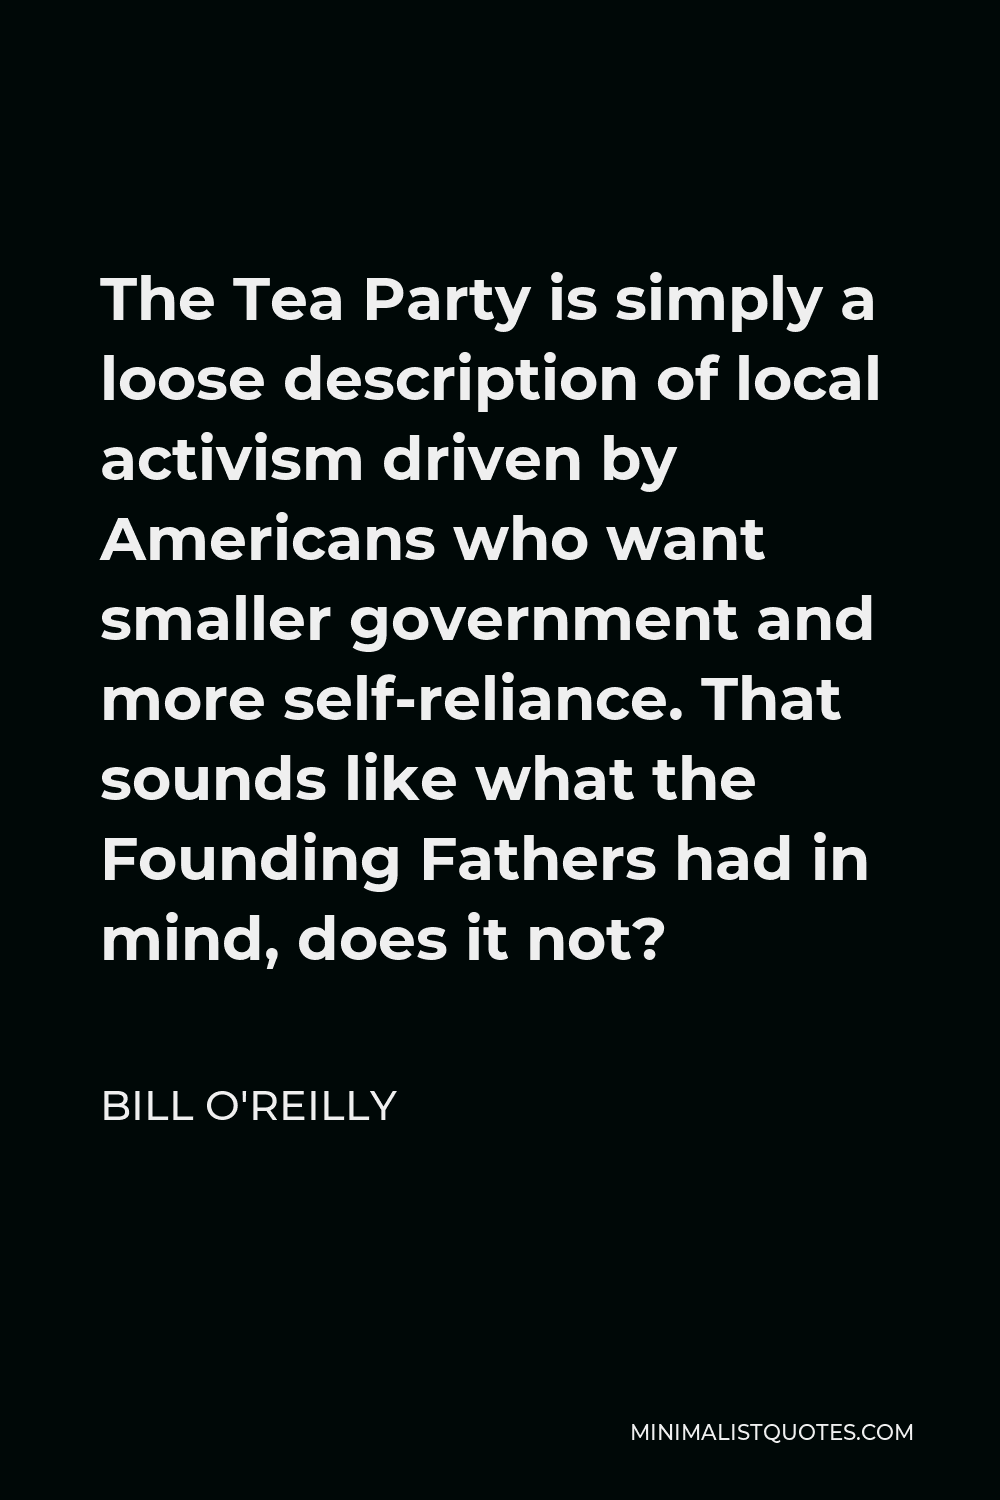 Bill O'Reilly Quote - The Tea Party is simply a loose description of local activism driven by Americans who want smaller government and more self-reliance. That sounds like what the Founding Fathers had in mind, does it not?